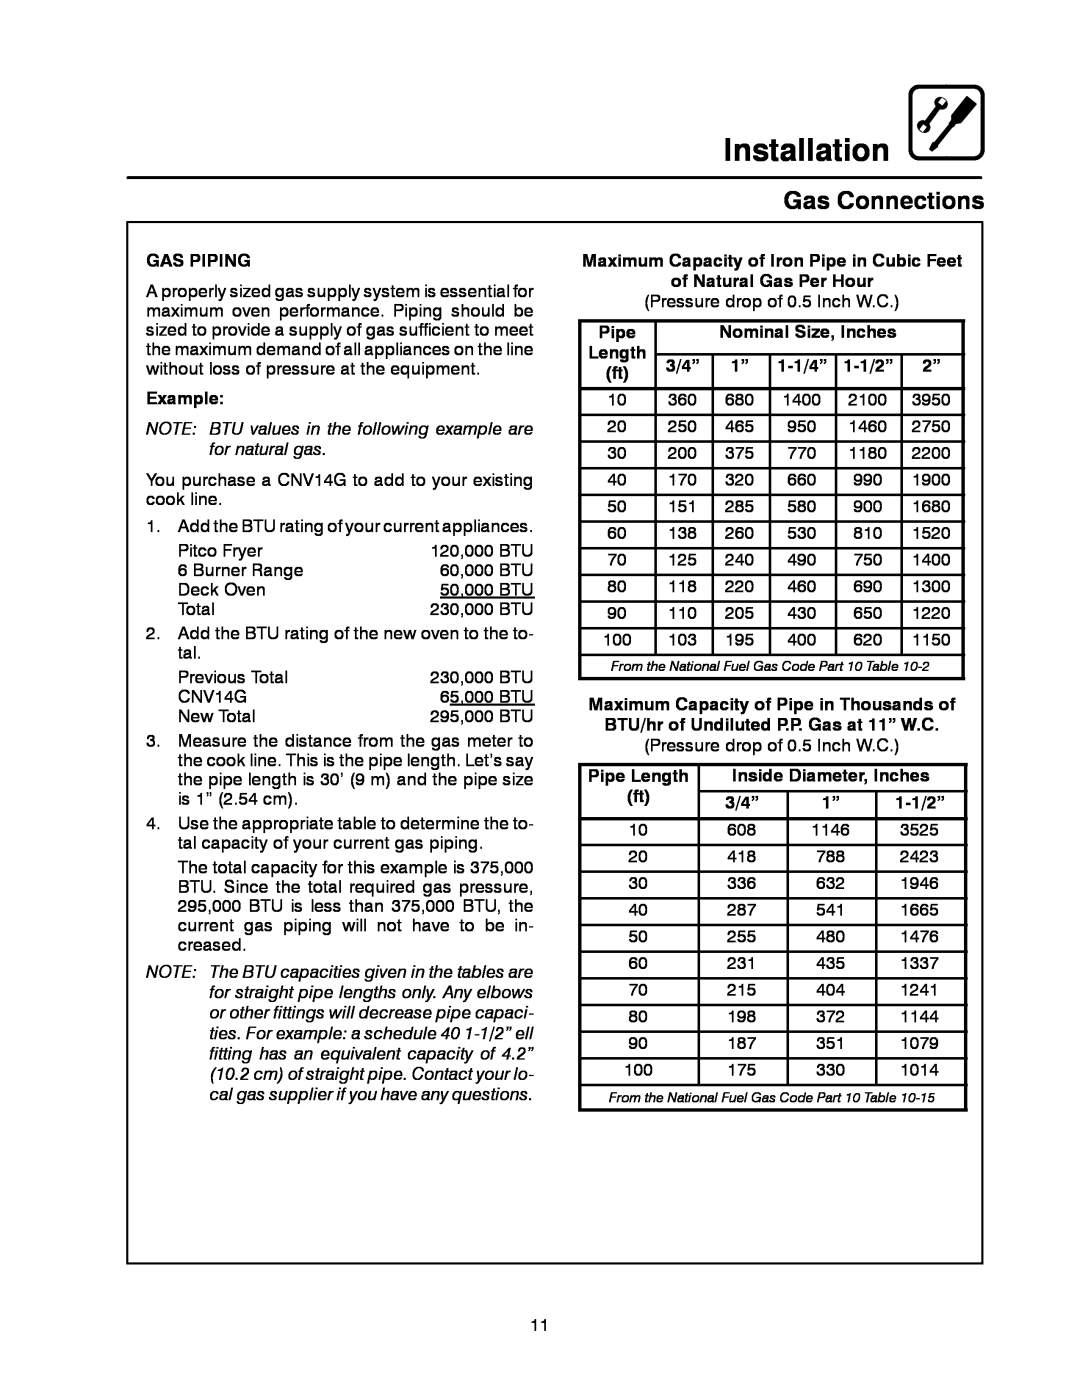 Blodgett CNV14E manual Gas Connections, Installation, Gas Piping, Example, Pipe, Nominal Size, Inches, Length, 3/4”, 1-1/4” 